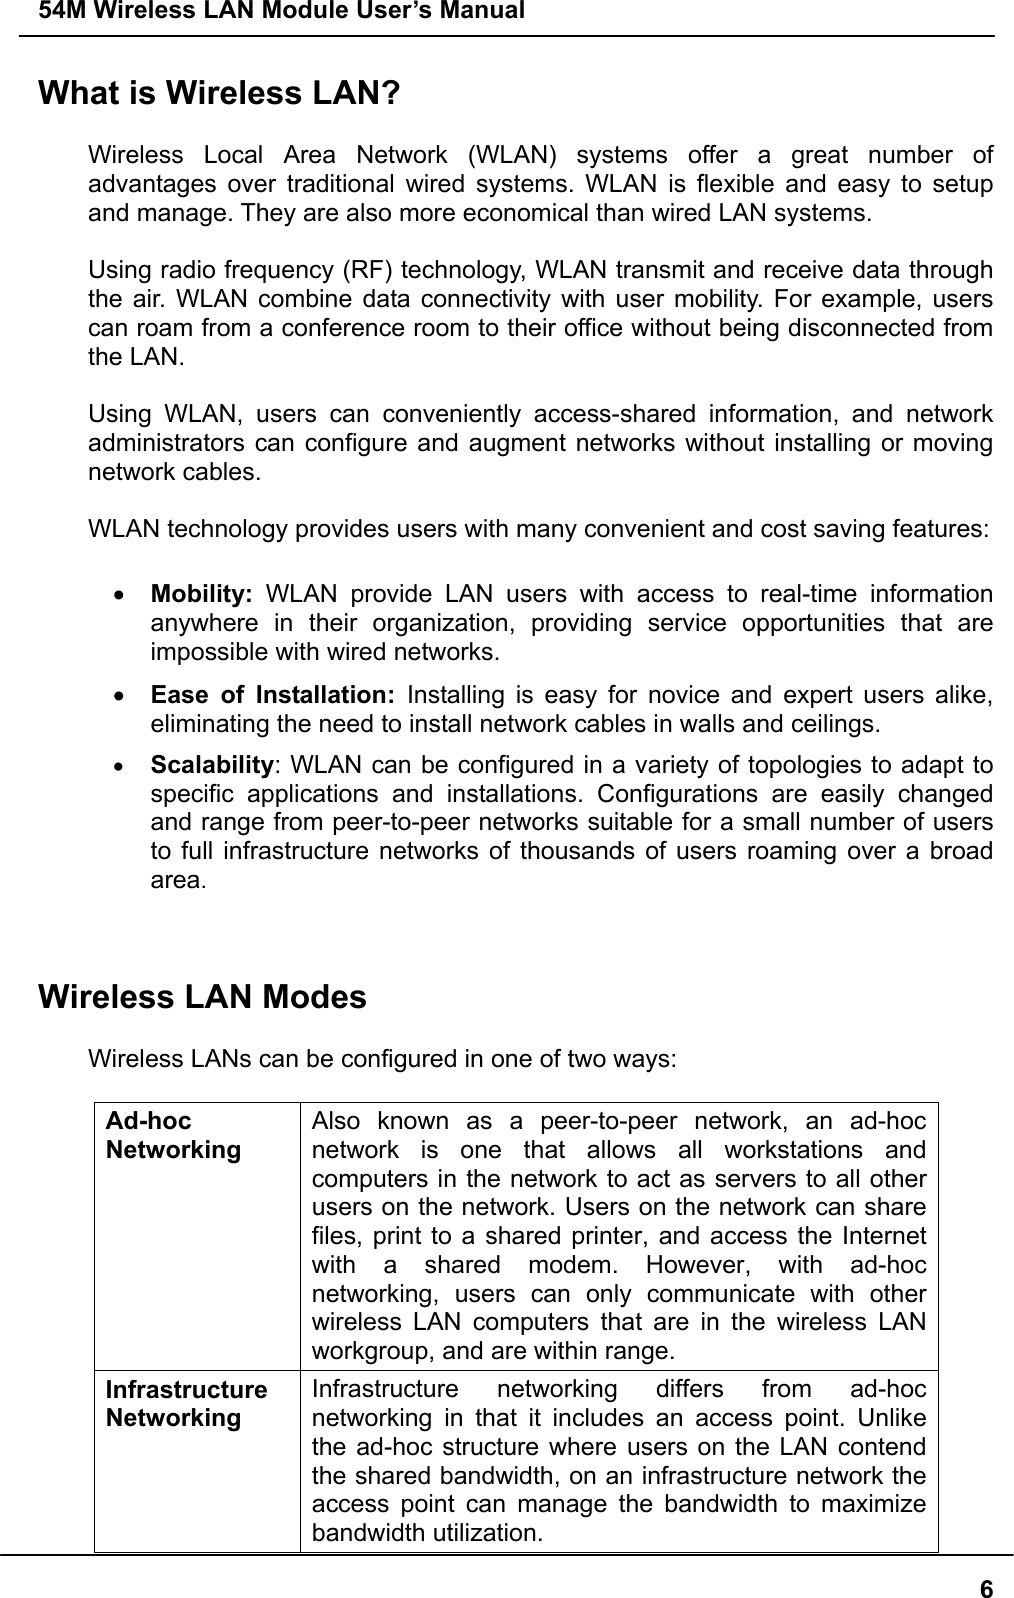 54M Wireless LAN Module User’s Manual  6What is Wireless LAN?  Wireless Local Area Network (WLAN) systems offer a great number of advantages over traditional wired systems. WLAN is flexible and easy to setup and manage. They are also more economical than wired LAN systems.  Using radio frequency (RF) technology, WLAN transmit and receive data through the air. WLAN combine data connectivity with user mobility. For example, users can roam from a conference room to their office without being disconnected from the LAN.  Using WLAN, users can conveniently access-shared information, and network administrators can configure and augment networks without installing or moving network cables.  WLAN technology provides users with many convenient and cost saving features:  •  Mobility: WLAN provide LAN users with access to real-time information anywhere in their organization, providing service opportunities that are impossible with wired networks. •  Ease of Installation: Installing is easy for novice and expert users alike, eliminating the need to install network cables in walls and ceilings.   •  Scalability: WLAN can be configured in a variety of topologies to adapt to specific applications and installations. Configurations are easily changed and range from peer-to-peer networks suitable for a small number of users to full infrastructure networks of thousands of users roaming over a broad area.   Wireless LAN Modes  Wireless LANs can be configured in one of two ways:  Ad-hoc  Networking Also known as a peer-to-peer network, an ad-hoc network is one that allows all workstations and computers in the network to act as servers to all other users on the network. Users on the network can share files, print to a shared printer, and access the Internet with a shared modem. However, with ad-hoc networking, users can only communicate with other wireless LAN computers that are in the wireless LAN workgroup, and are within range. Infrastructure Networking Infrastructure networking differs from ad-hoc networking in that it includes an access point. Unlike the ad-hoc structure where users on the LAN contend the shared bandwidth, on an infrastructure network the access point can manage the bandwidth to maximize bandwidth utilization.   